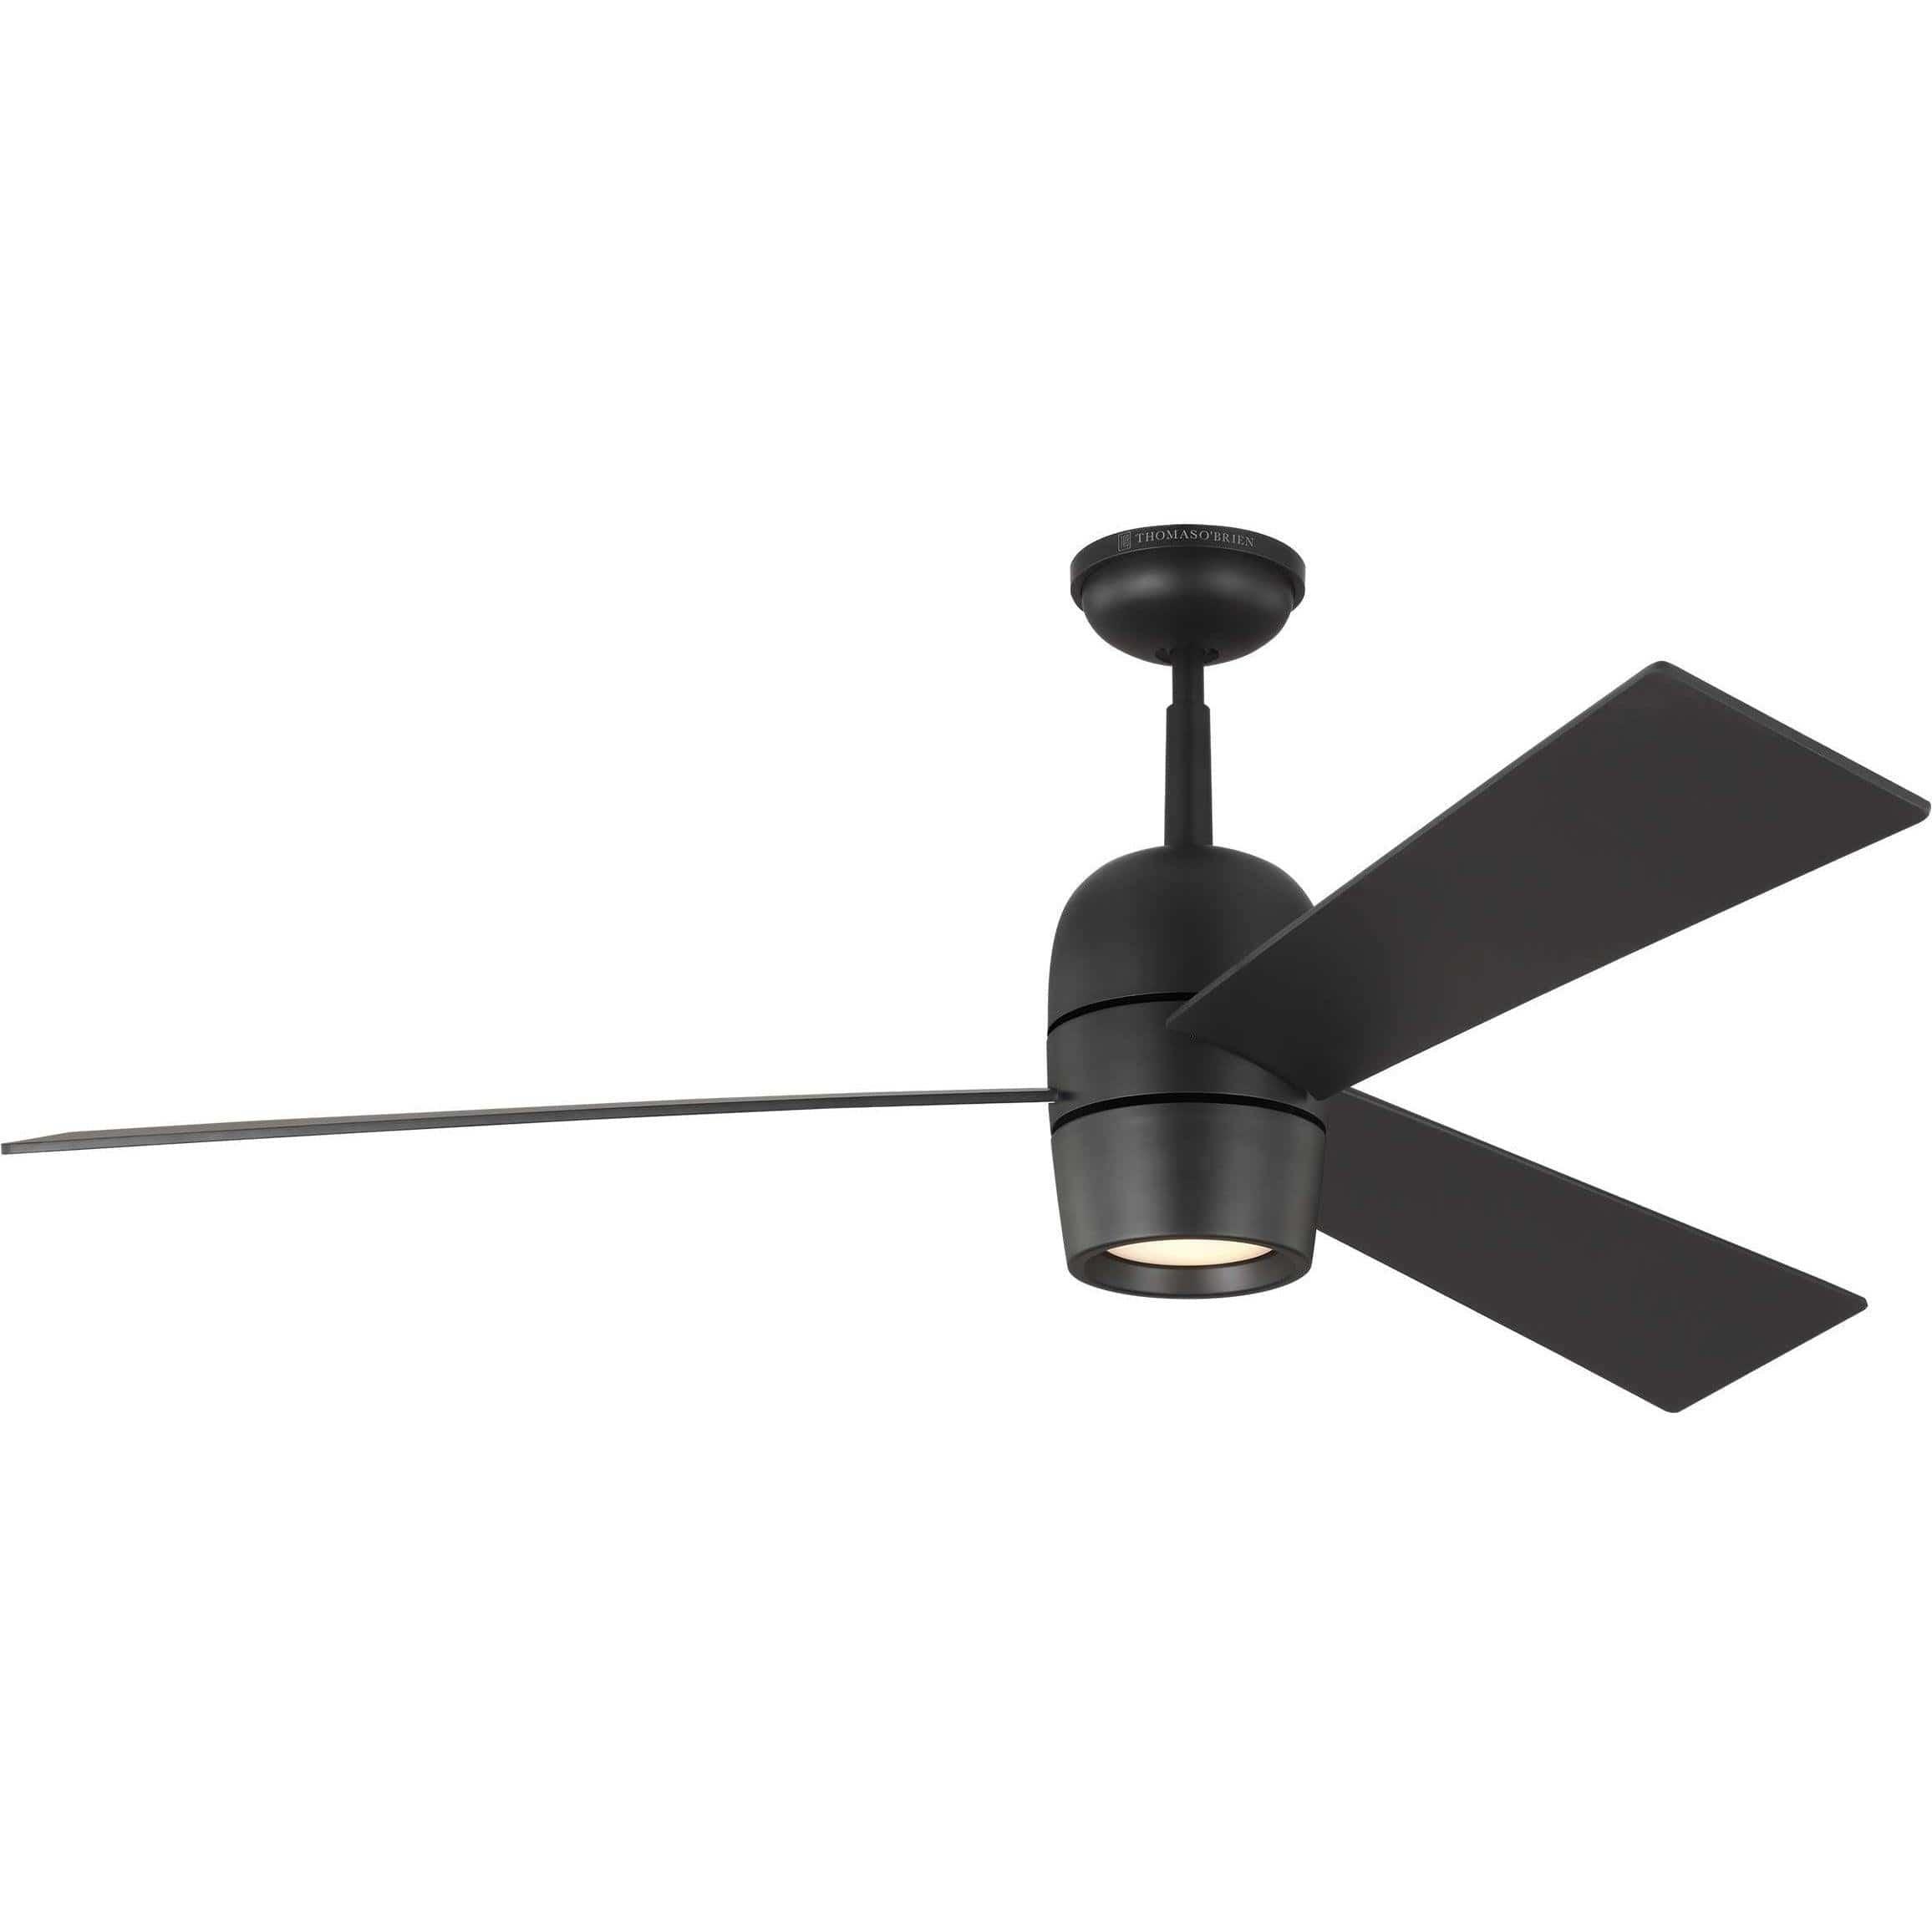 Visual Comfort Fan Collection - Alba LED 60" Ceiling Fan - 3ALBR60MBKD | Montreal Lighting & Hardware